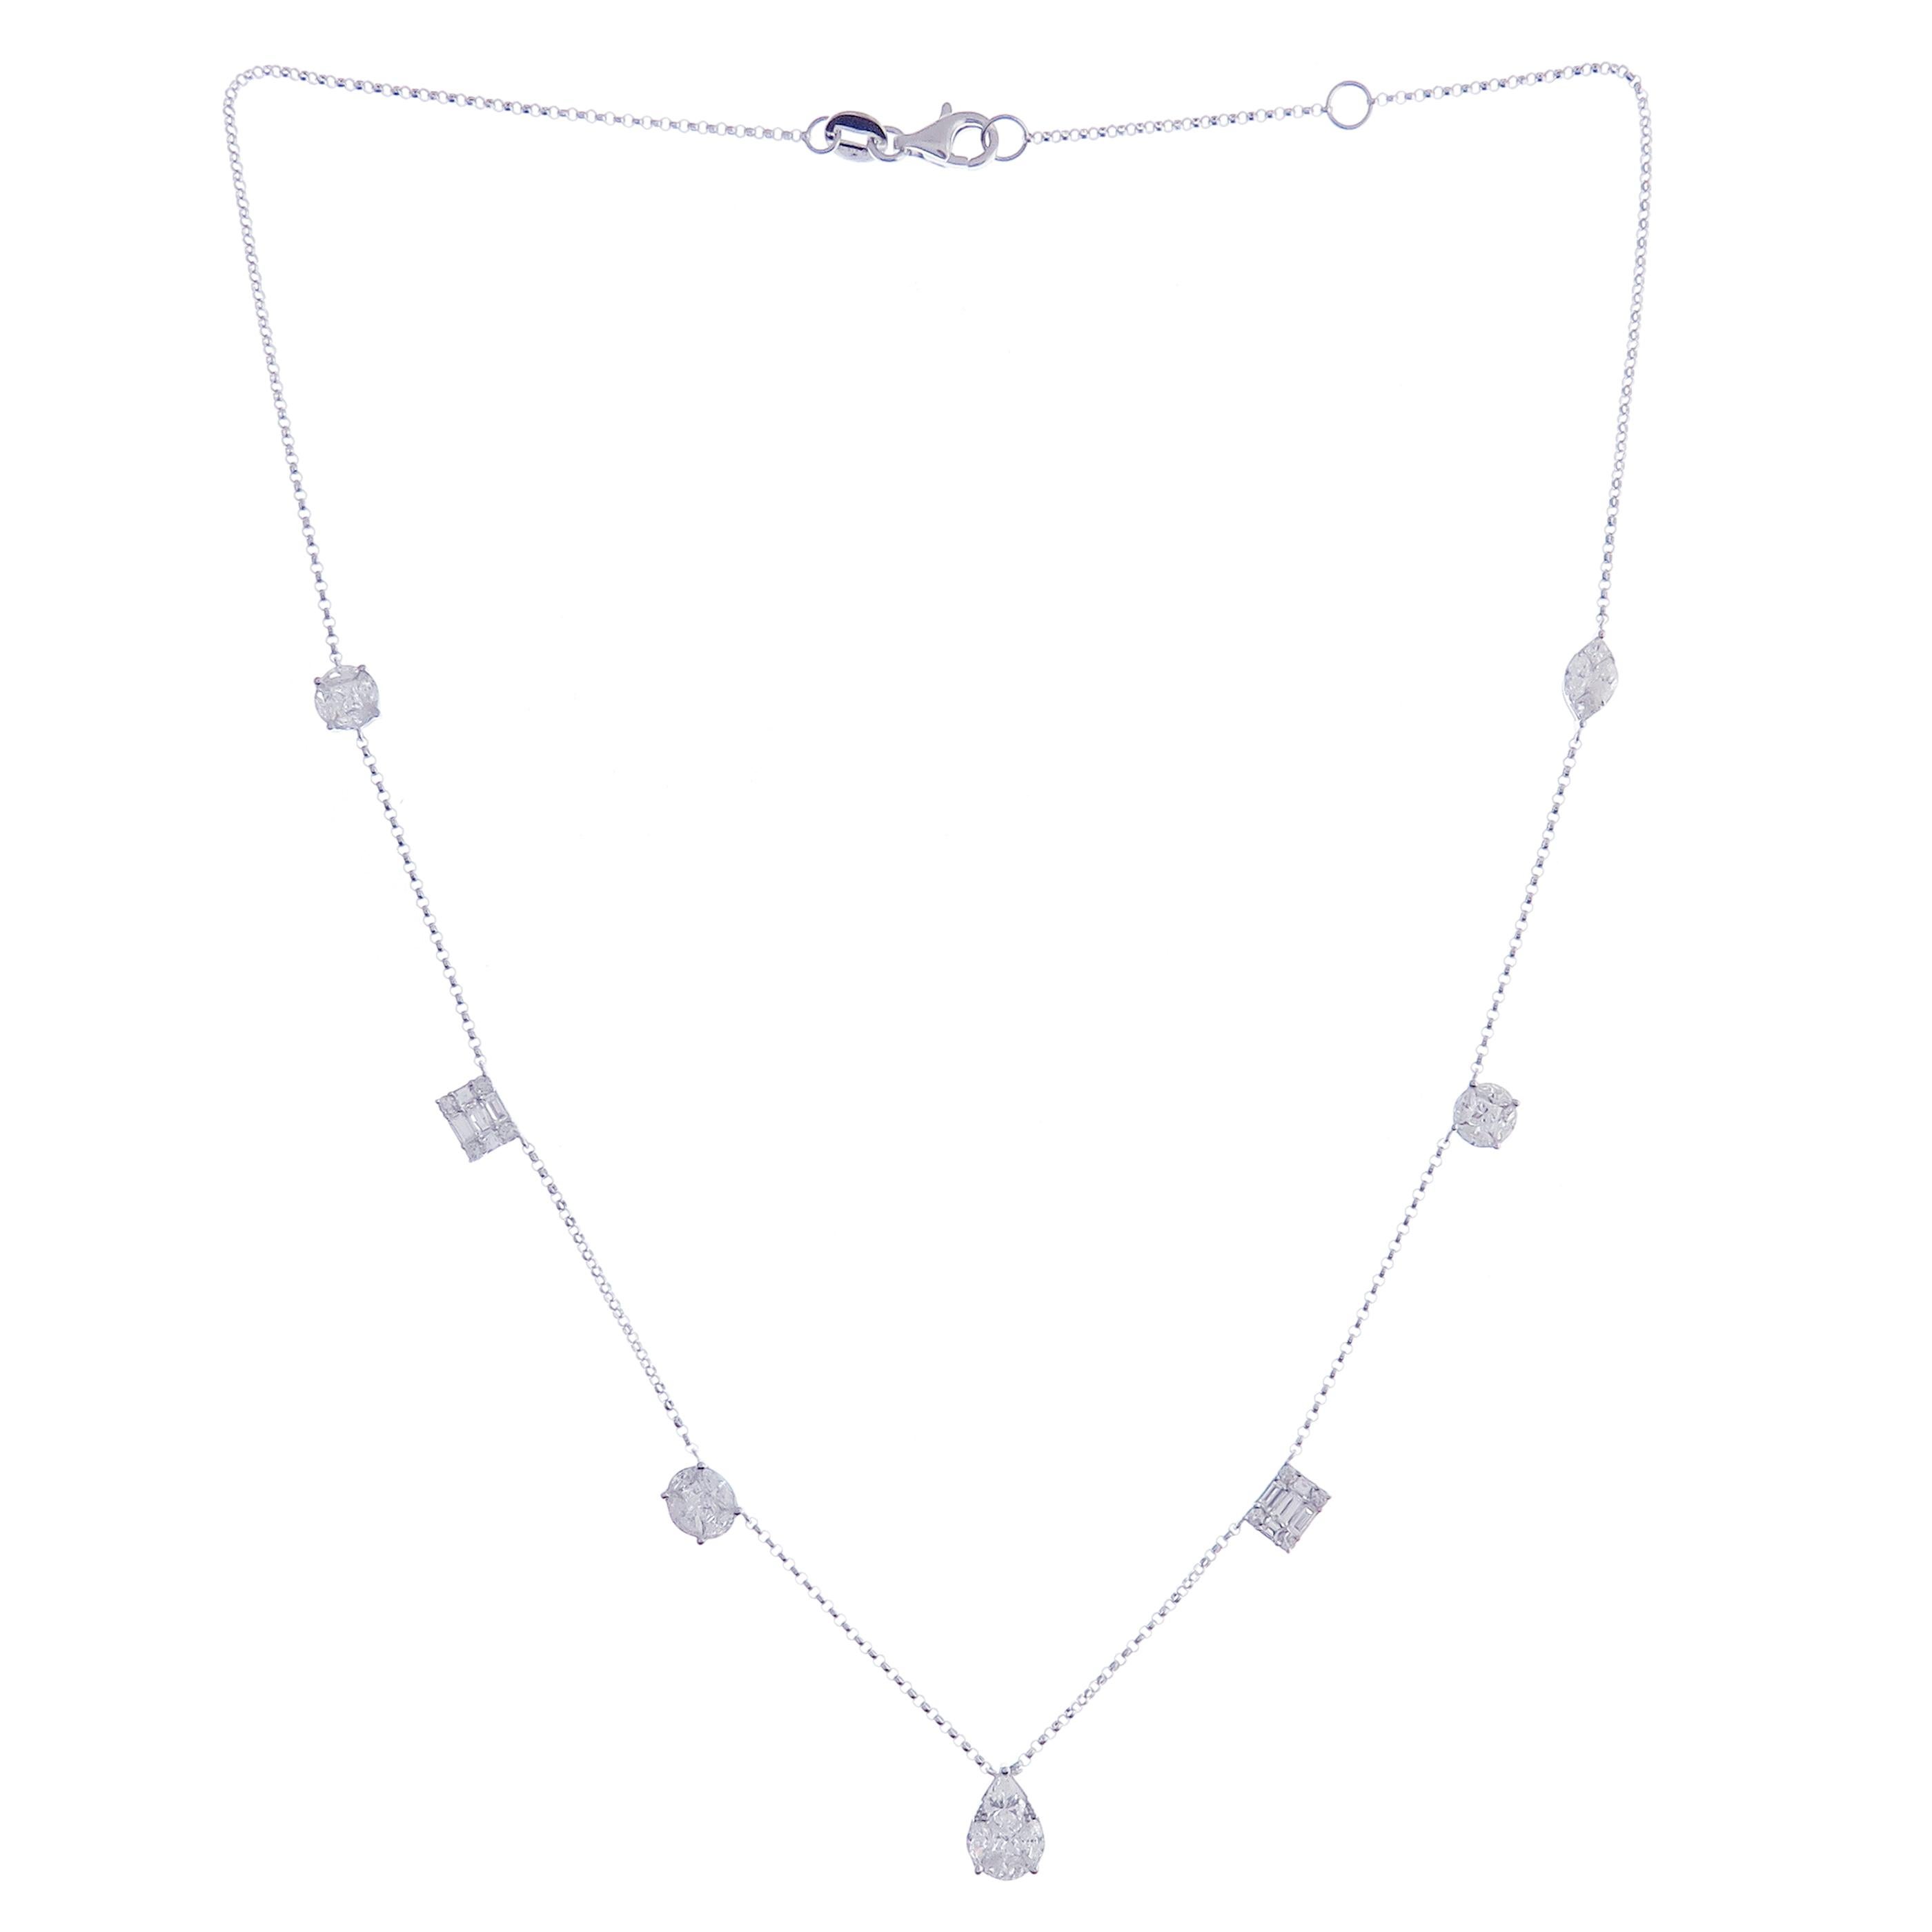 This diamond mix shape necklace is crafted in 18-karat white gold, weighing approximately 2.20 total carats of SI-V Quality white diamonds.

Necklace is 16